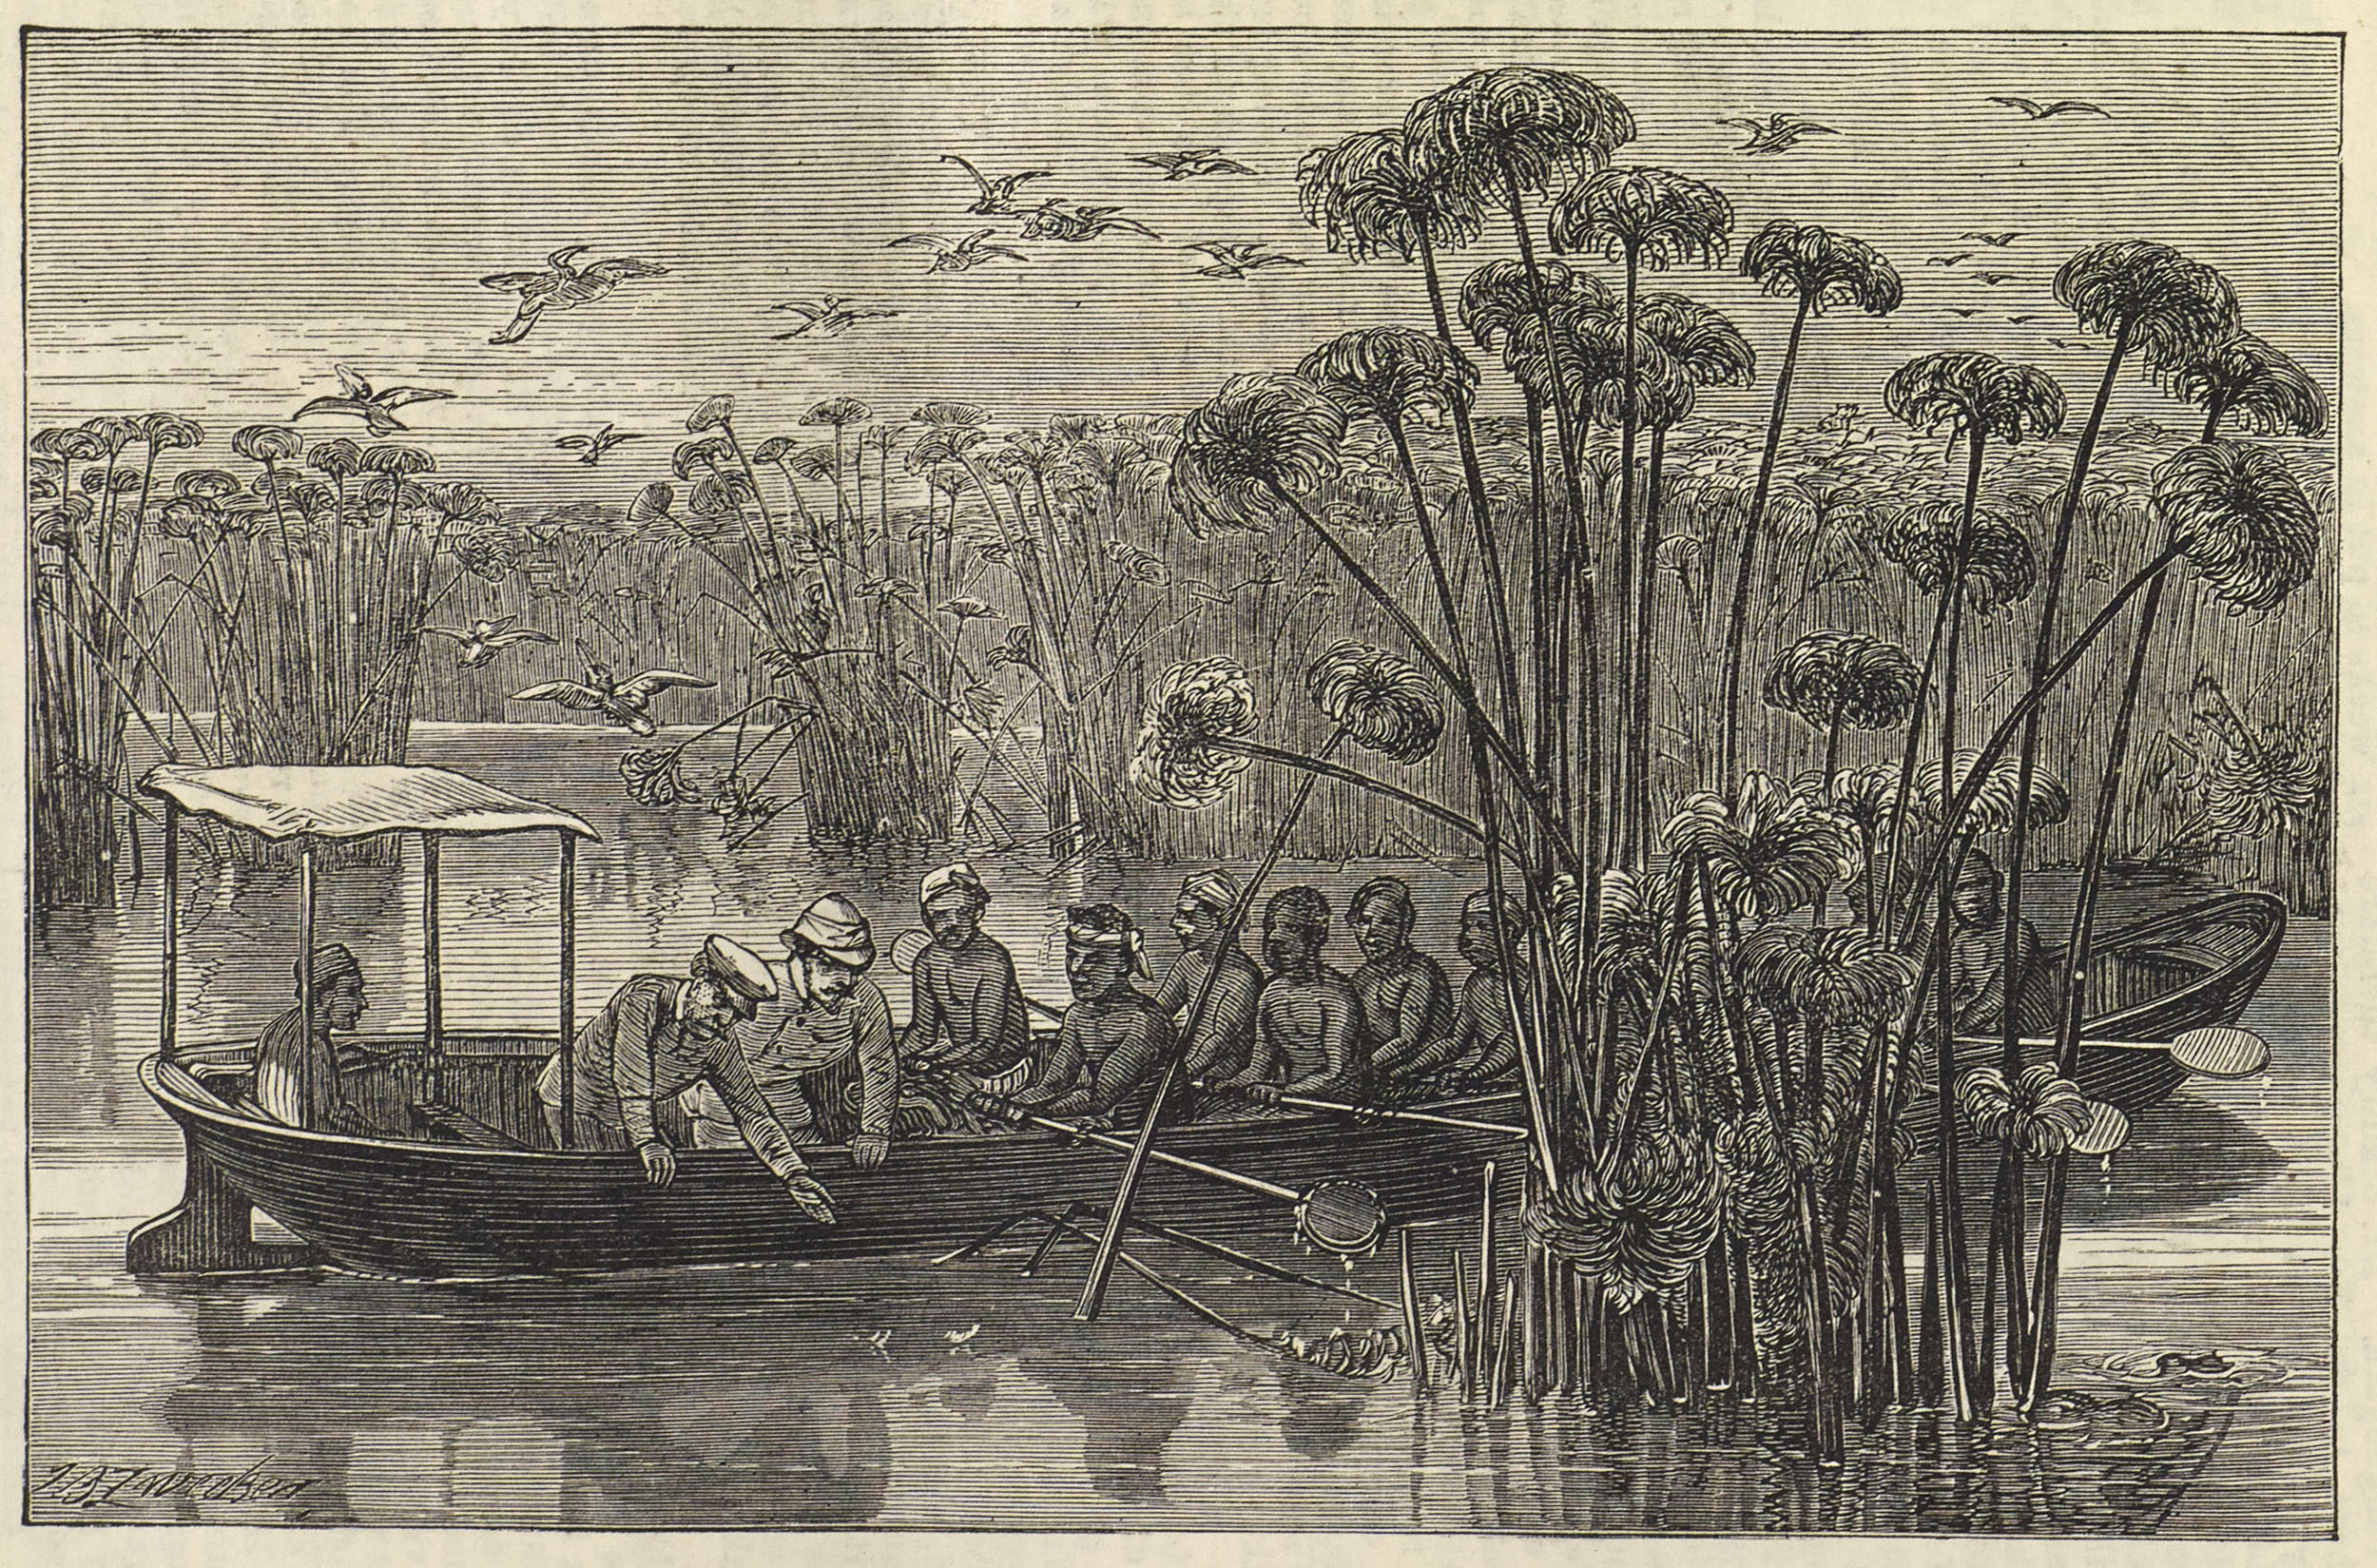 At the Mouth of the Rusizi, Lake Tanganyika. Illustration from Review of Henry M. Stanley's How I Found Livingstone (Anon. 1872:485), detail. Copyright National Library of Scotland. Creative Commons Share-alike 2.5 UK: Scotland (https://creativecommons.org/licenses/by-nc-sa/2.5/scotland/).